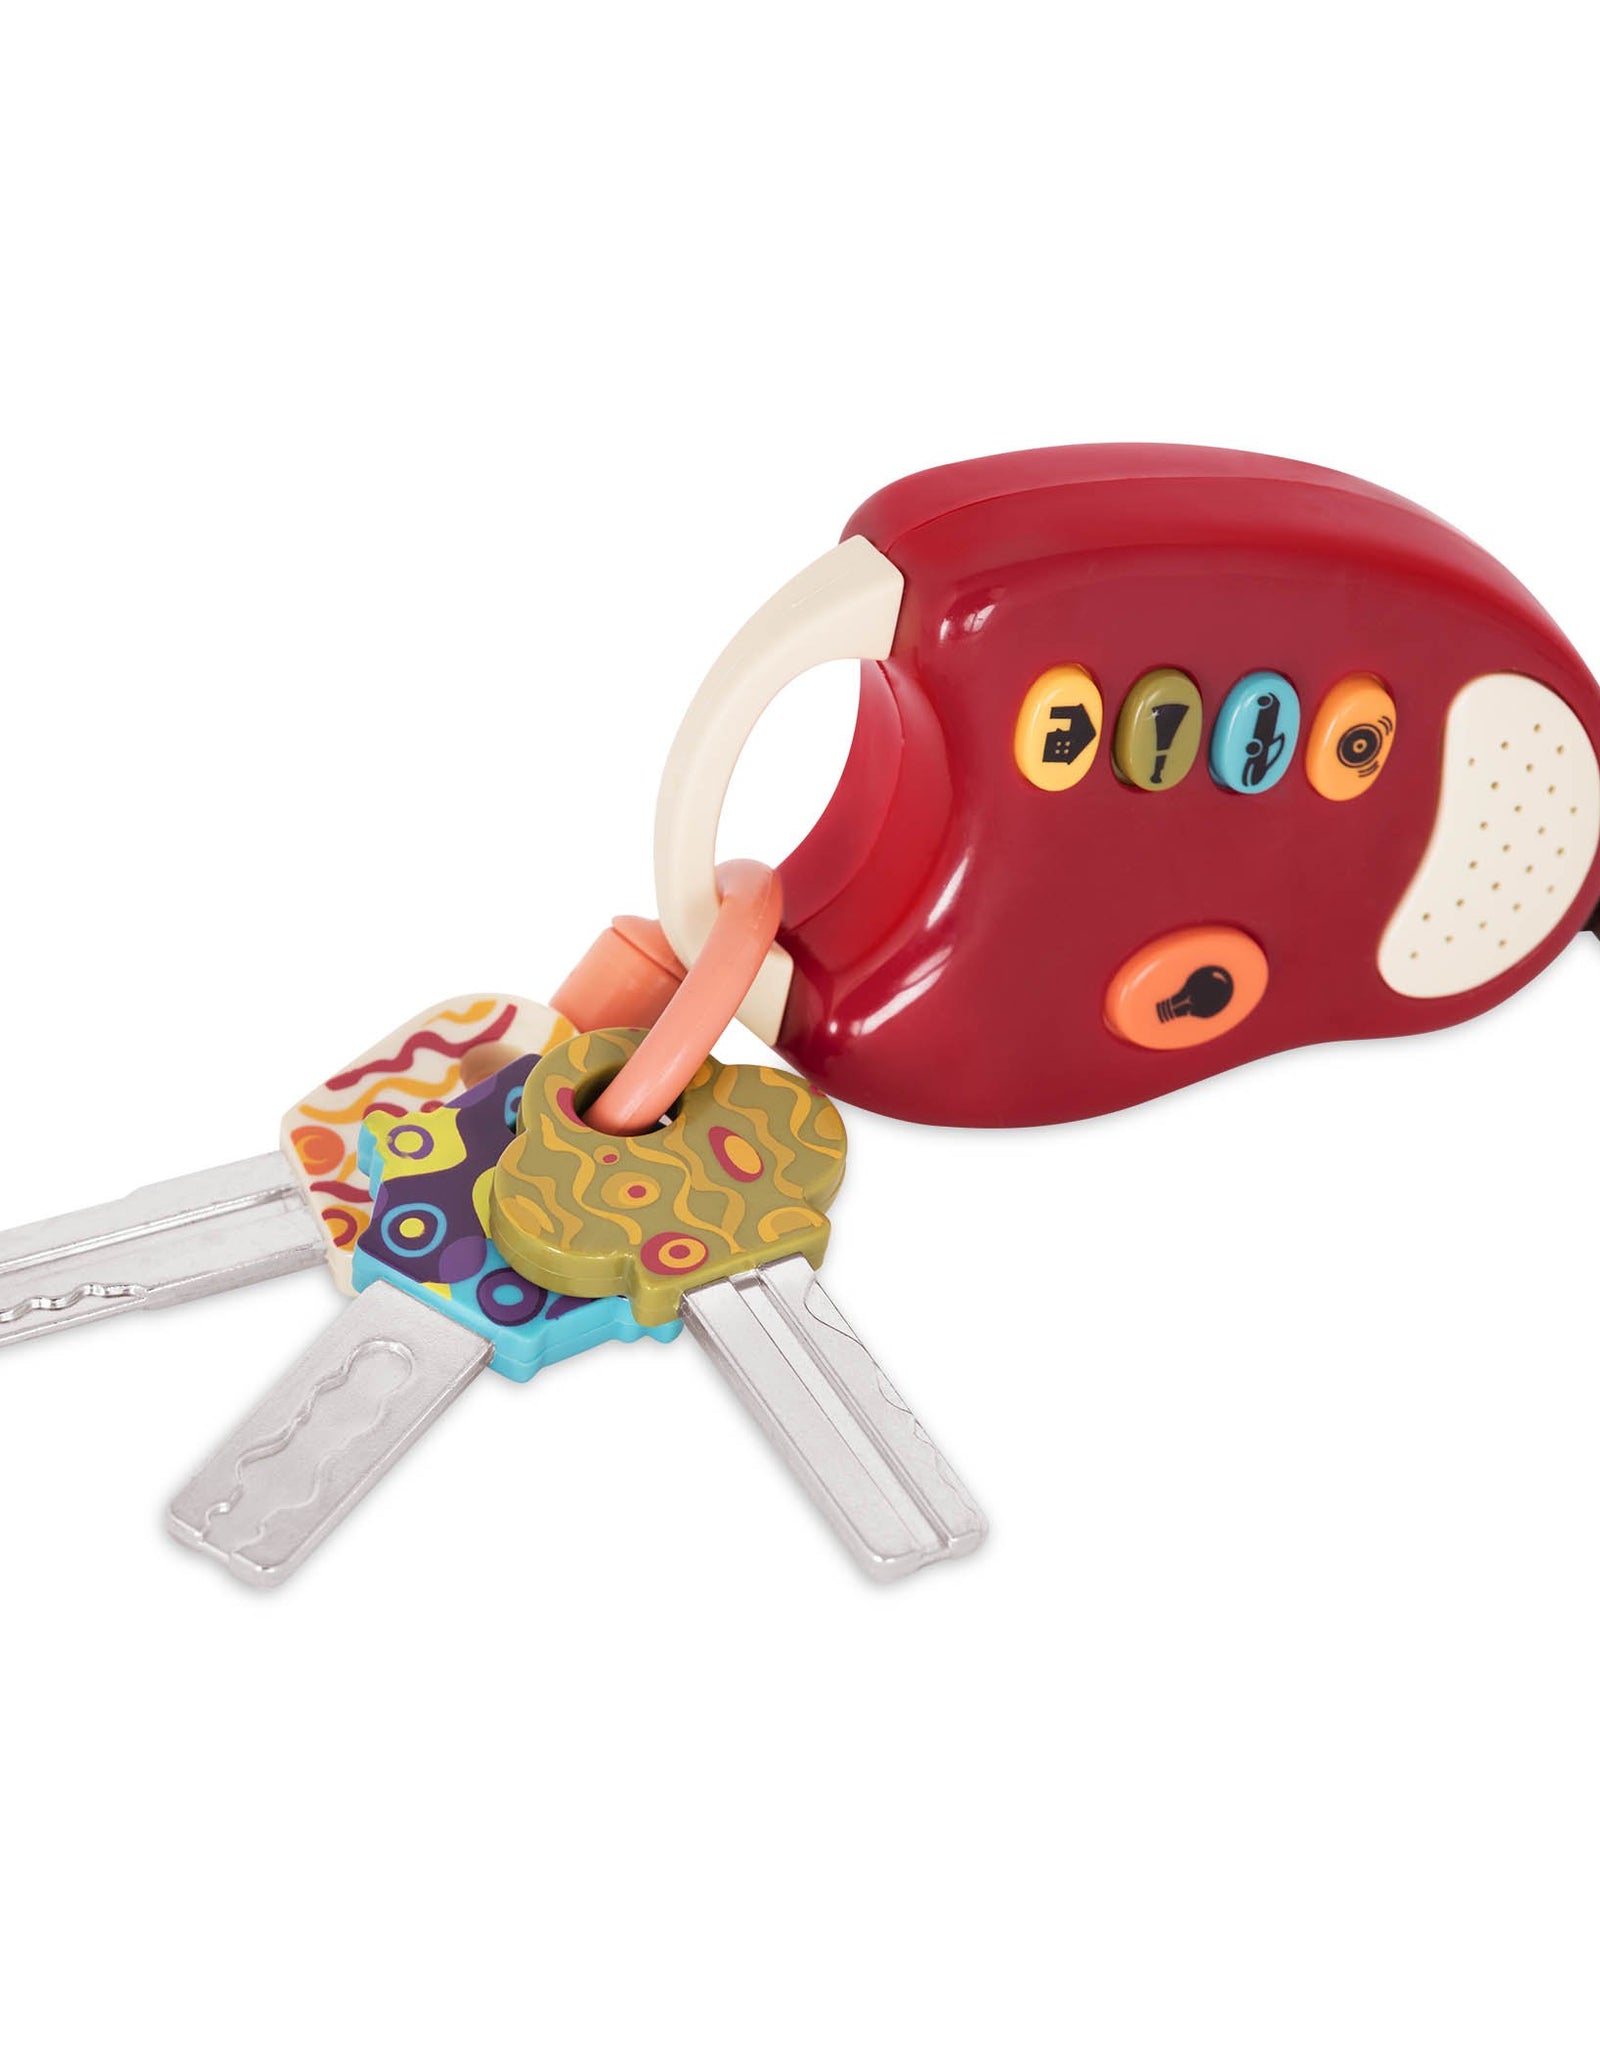 B. toys – FunKeys Toy – Funky Toy Keys for Toddlers and Babies – Toy Car Keys and Red remote with Light and Sounds – Non-Toxic